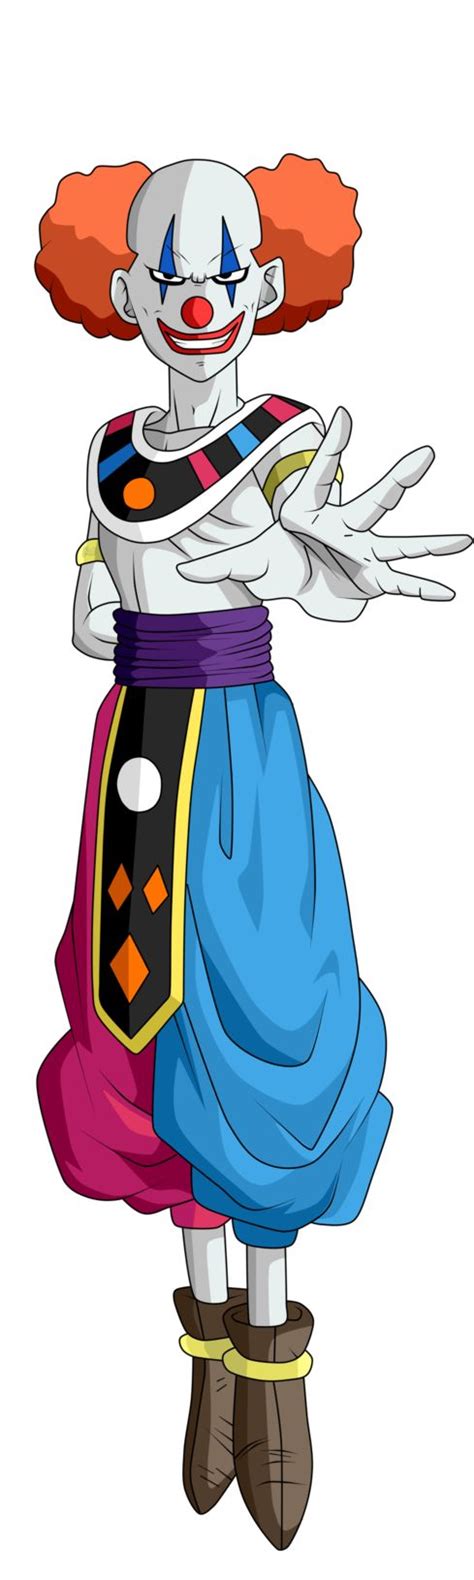 Between the end of dragon ball z to dragon ball gt, videl's hair grows back to its length, reaching her hips and is done up in a long braid. Vermouth - Dios de la Destrucción del Universo 11 - DRAGÓN BALL SUPER | 666 | Pinterest | 11, 2 ...